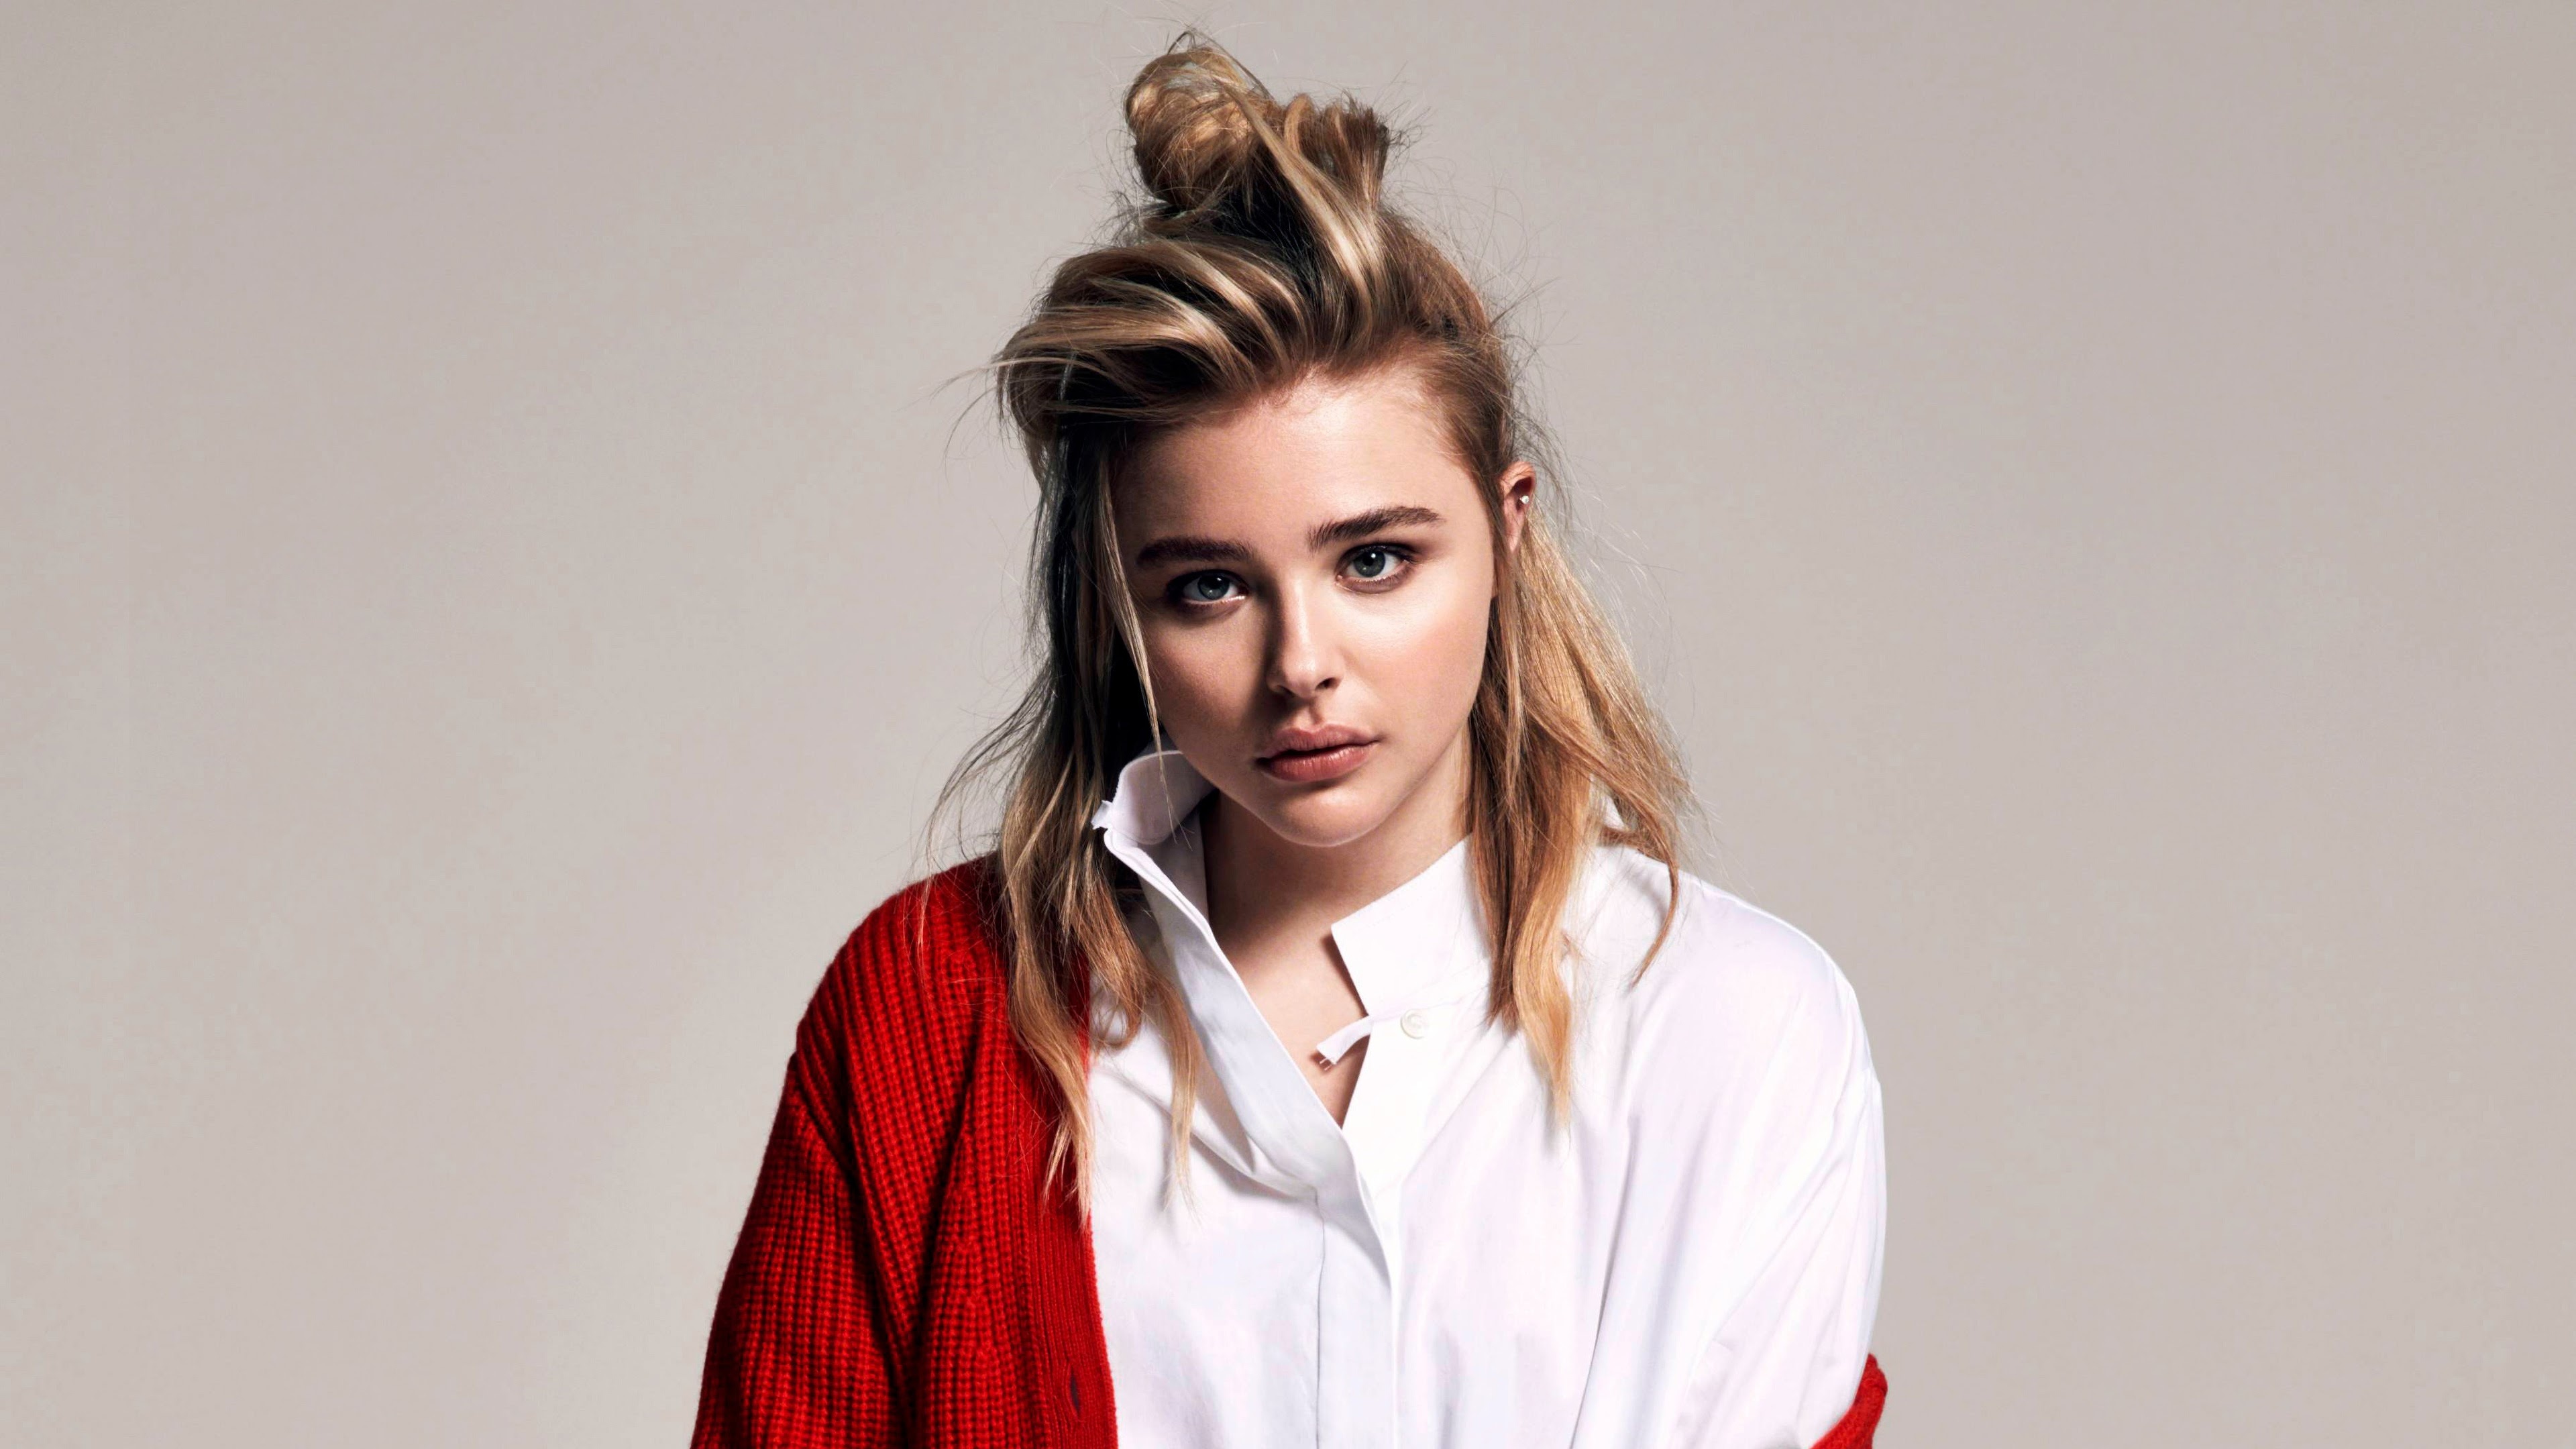 Chloe Moretz: The recipient of four MTV Movie and TV Awards, and two People's Choice Awards. 3840x2160 4K Wallpaper.